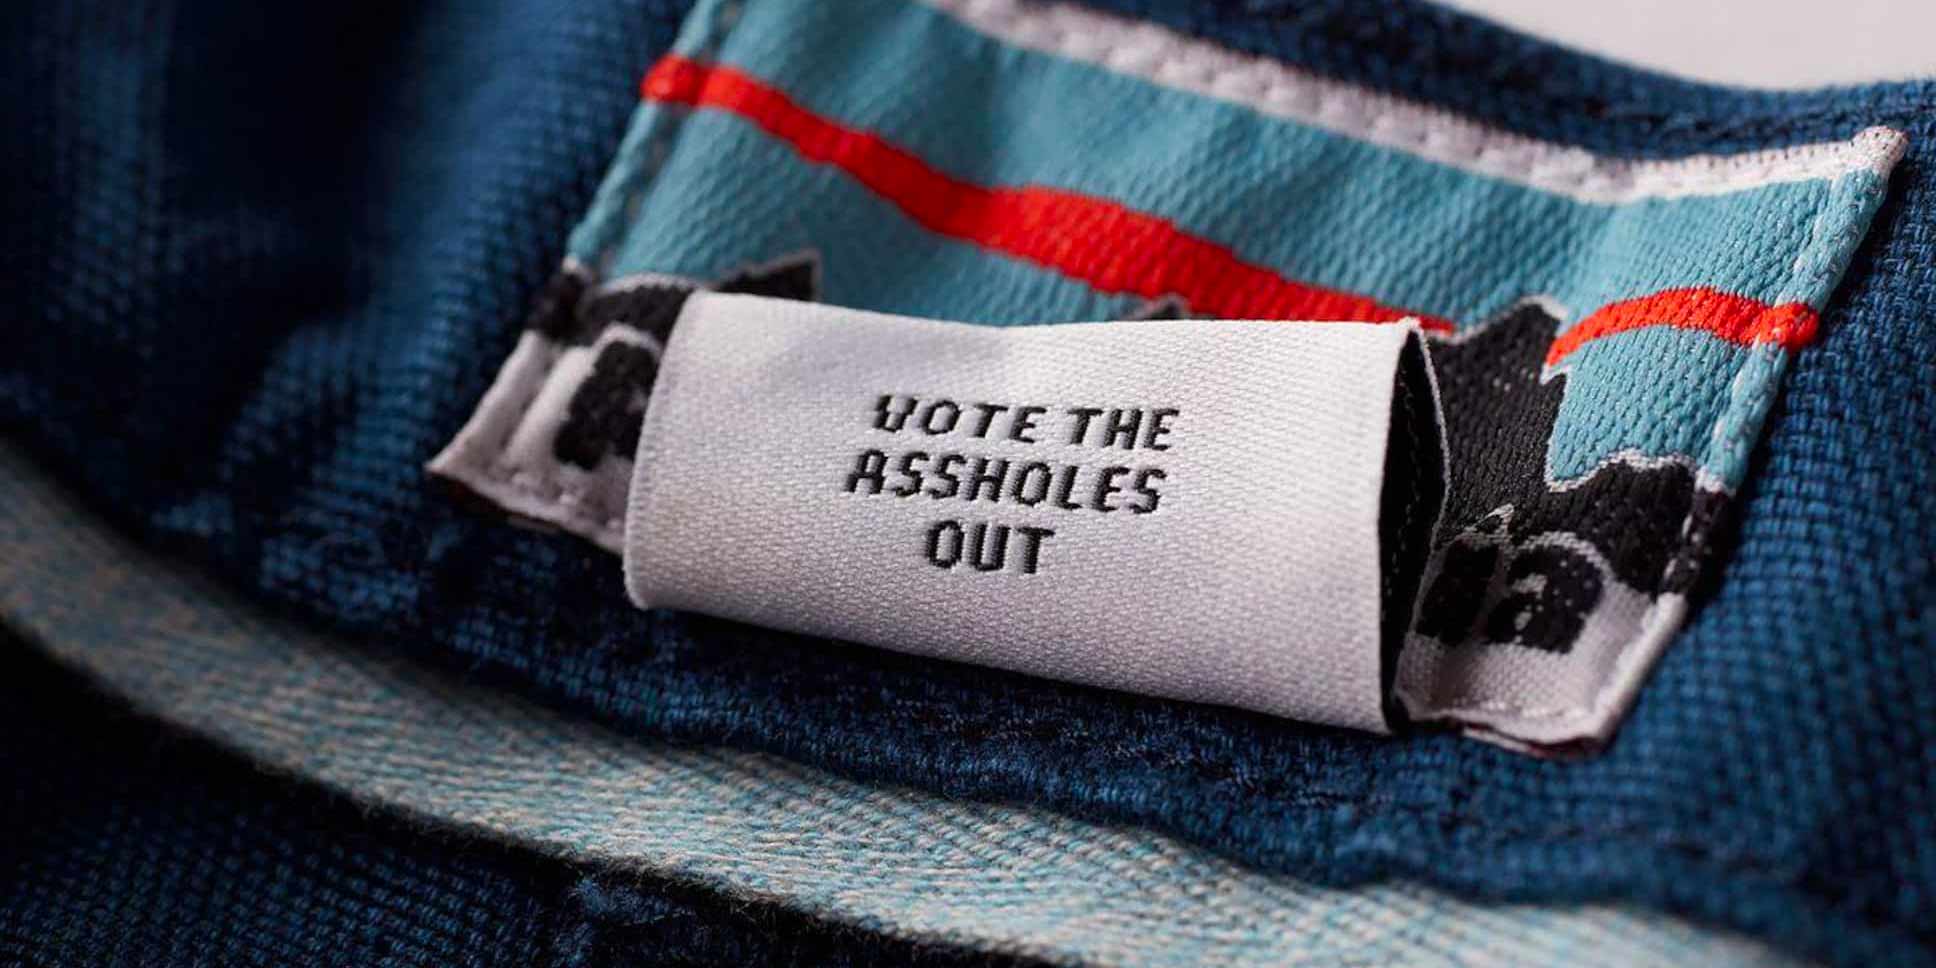 Vote-the-asshole-©PATAGONIA